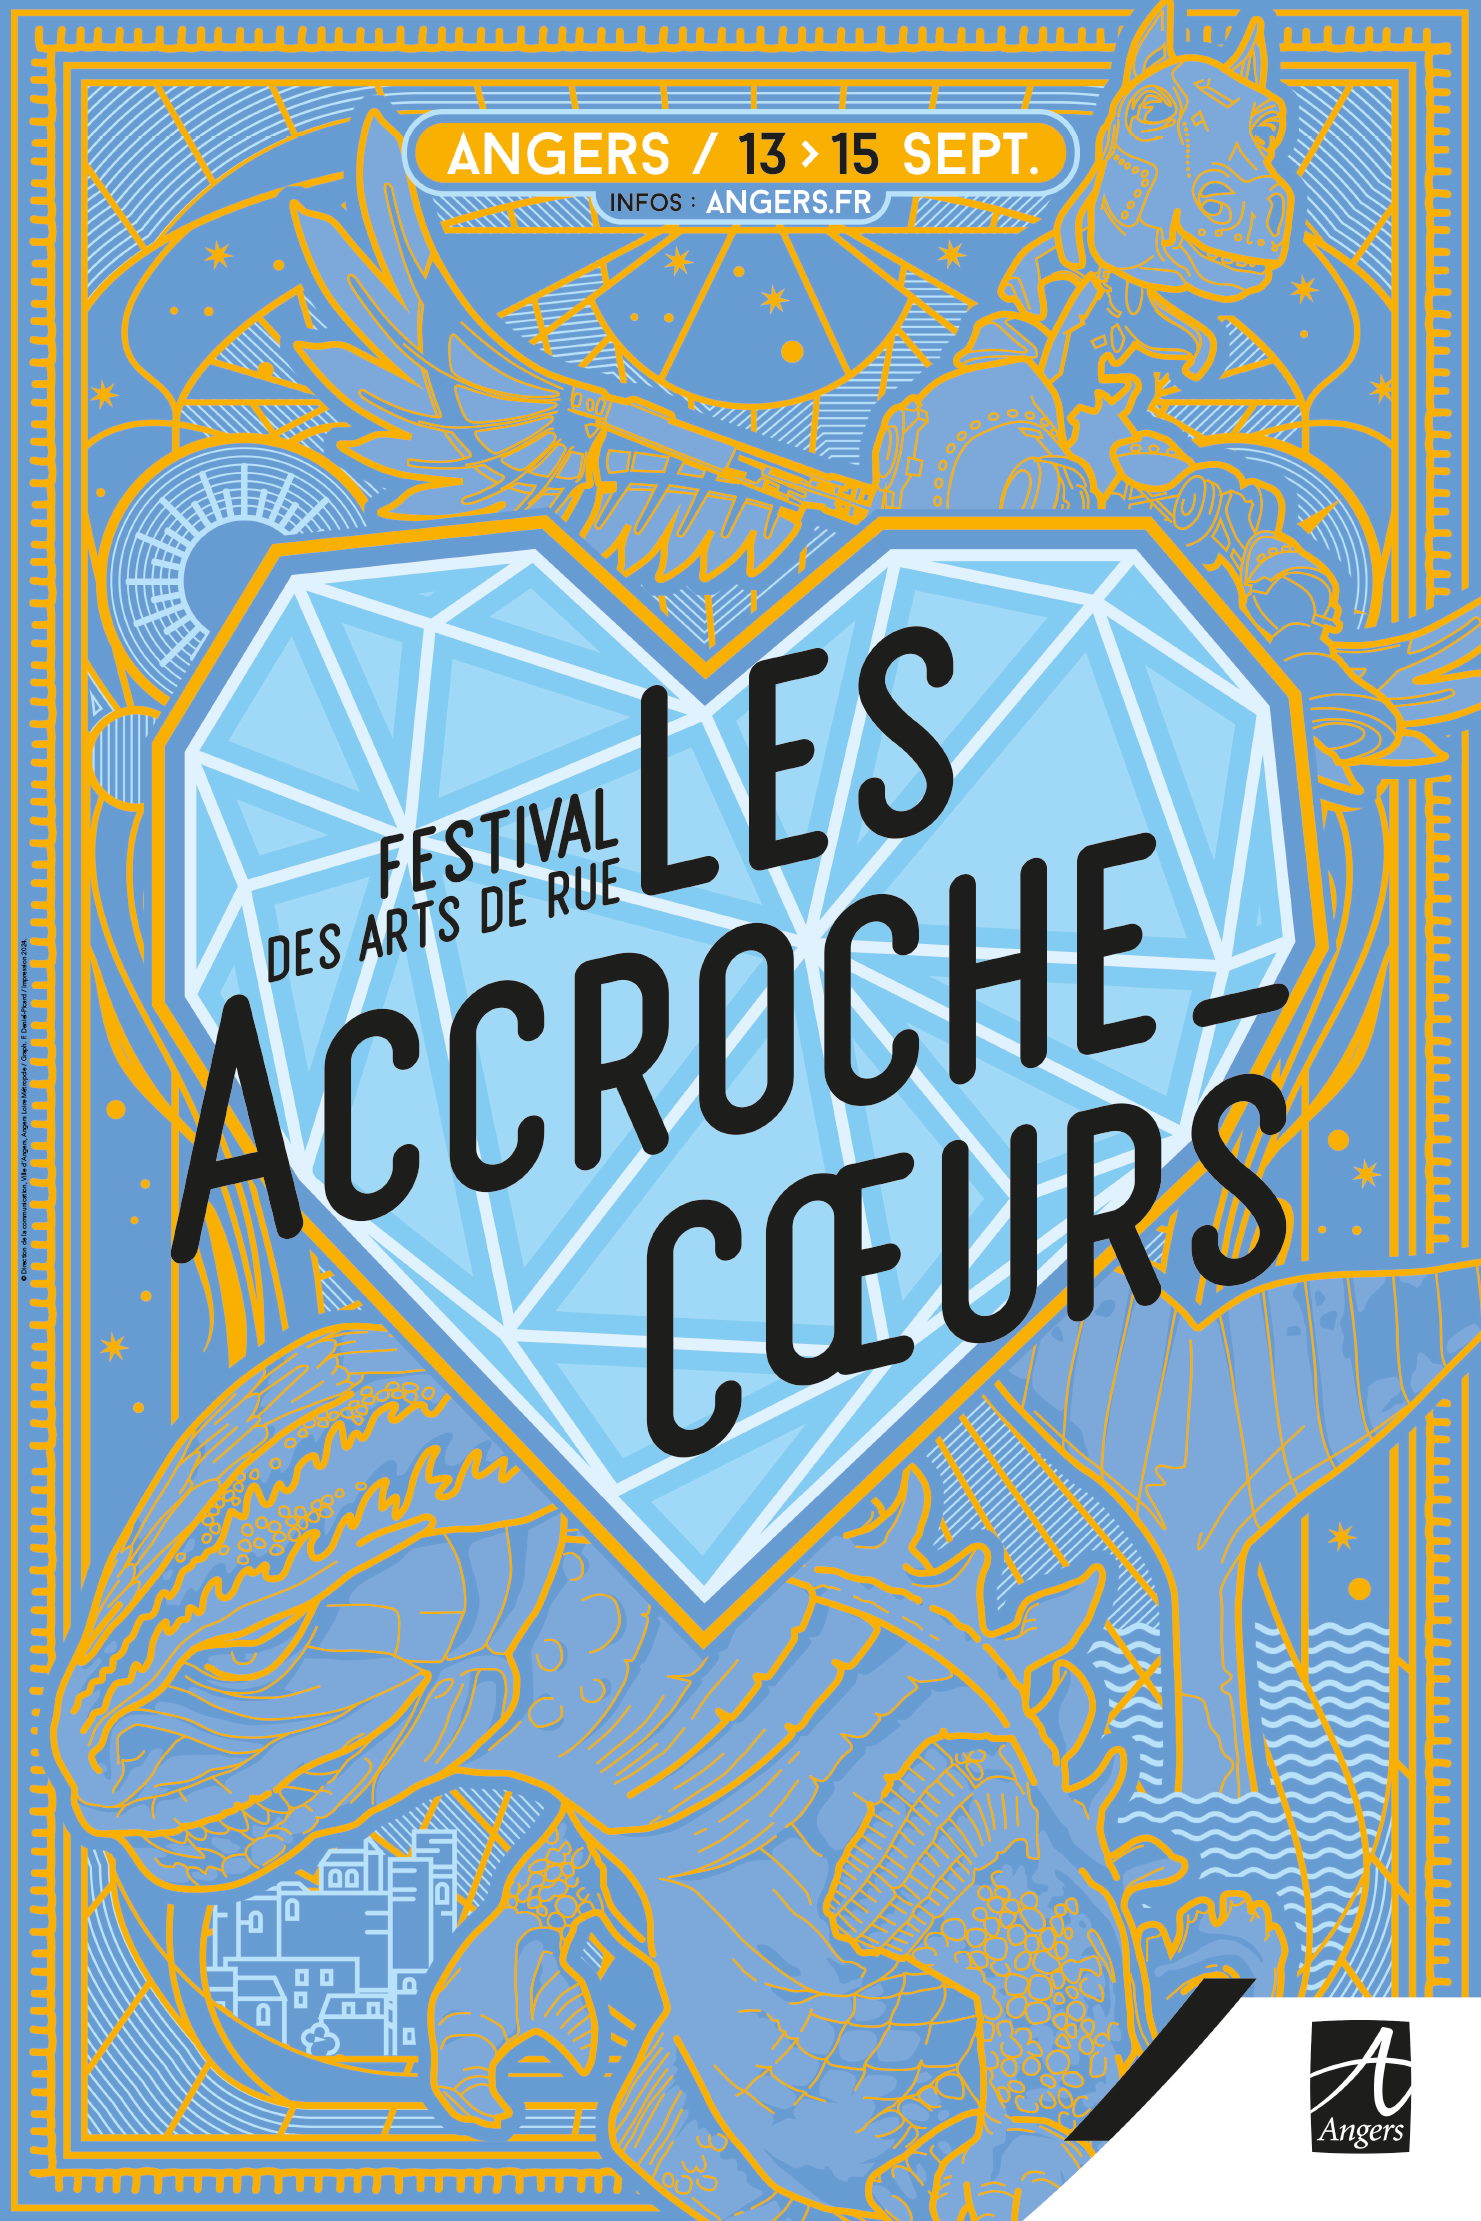 Fundraiser:  The library's food stand at Les Accroche-cœurs!